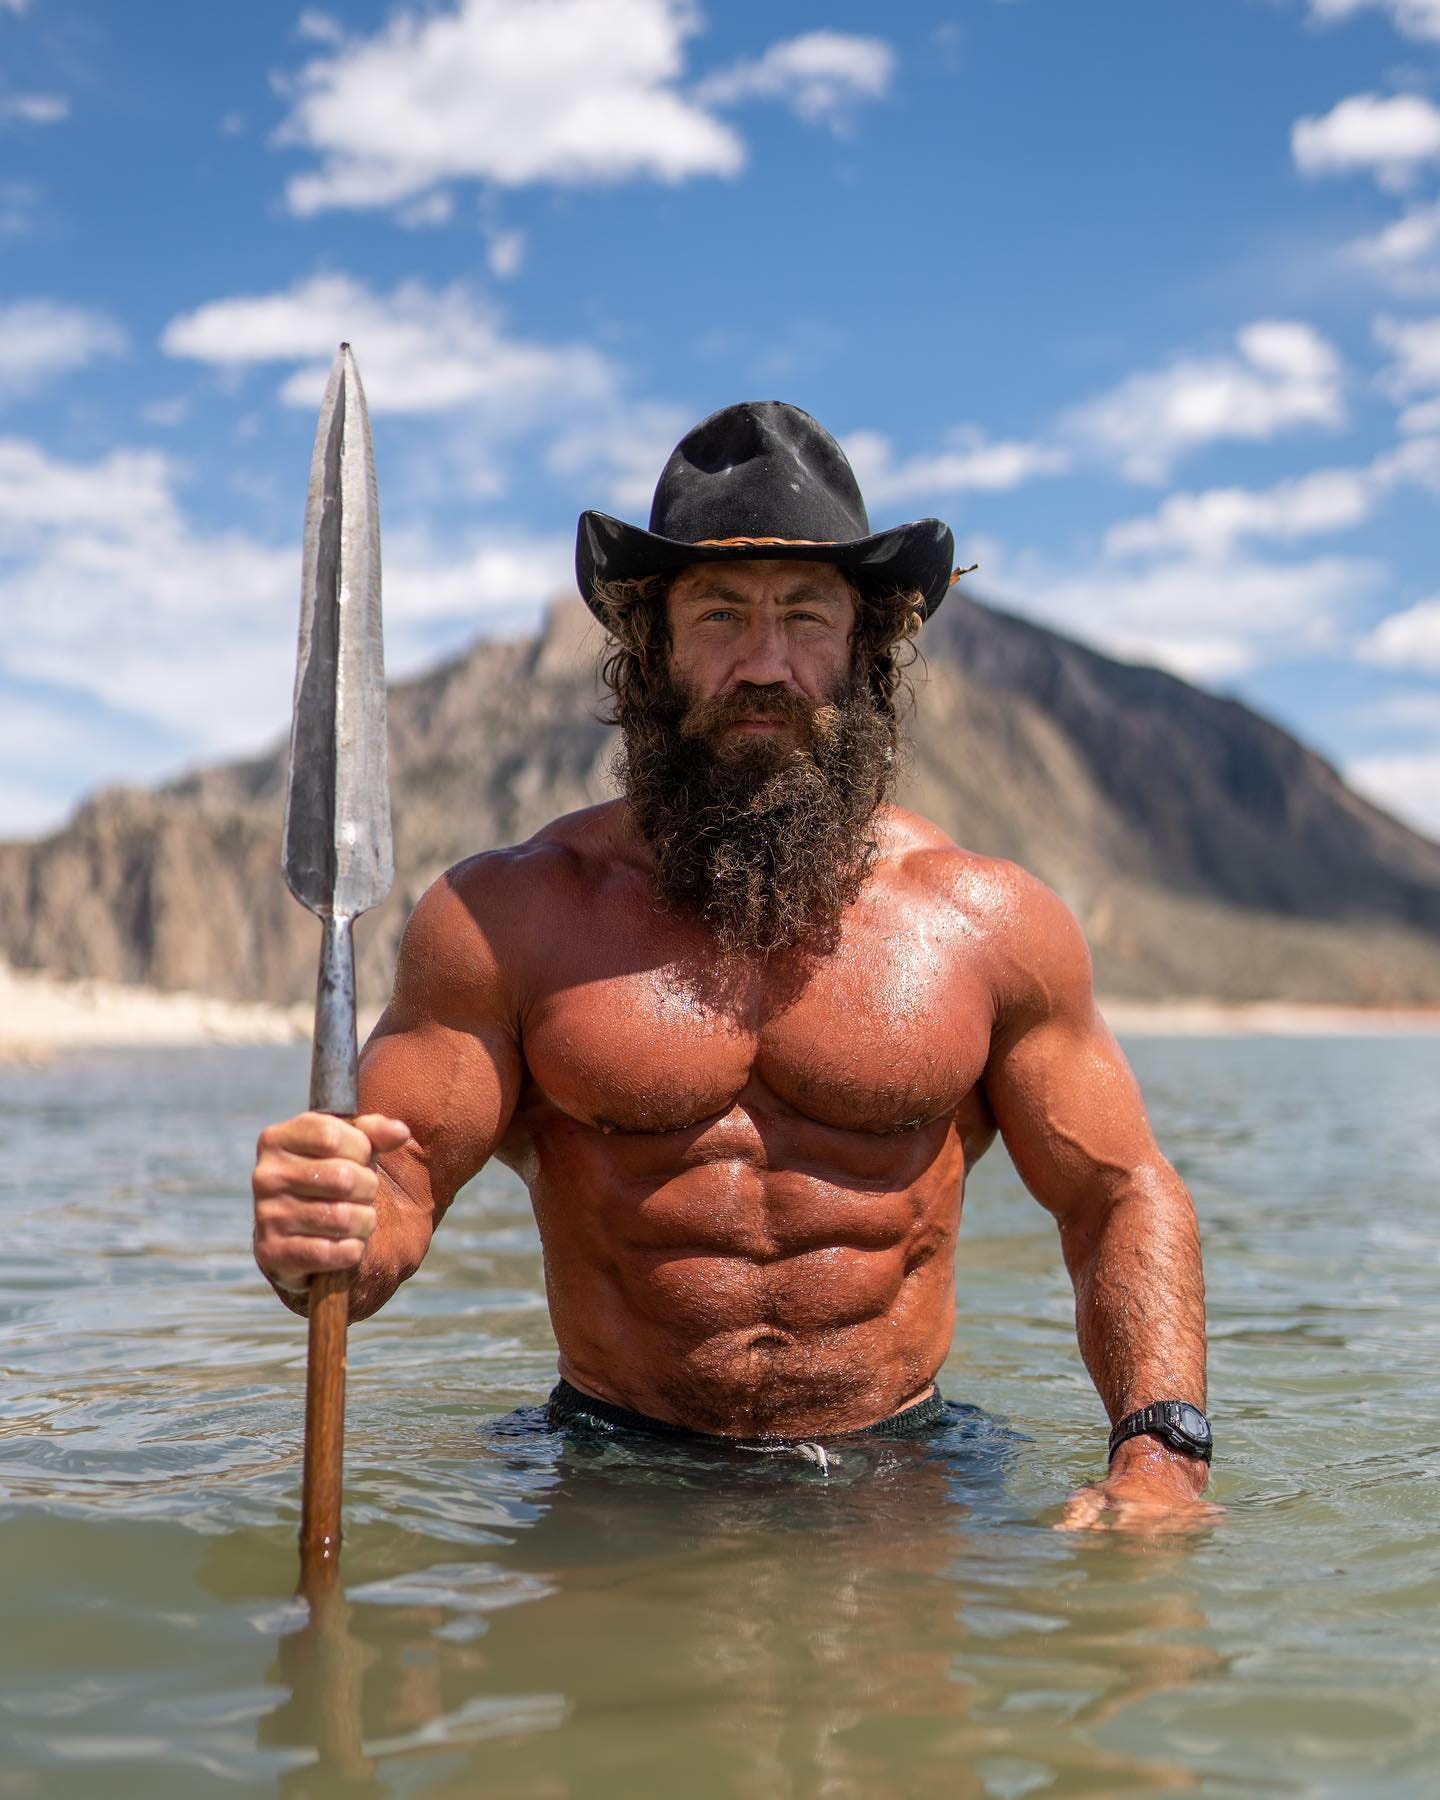 May be an image of one or more people, beard, body of water and nature